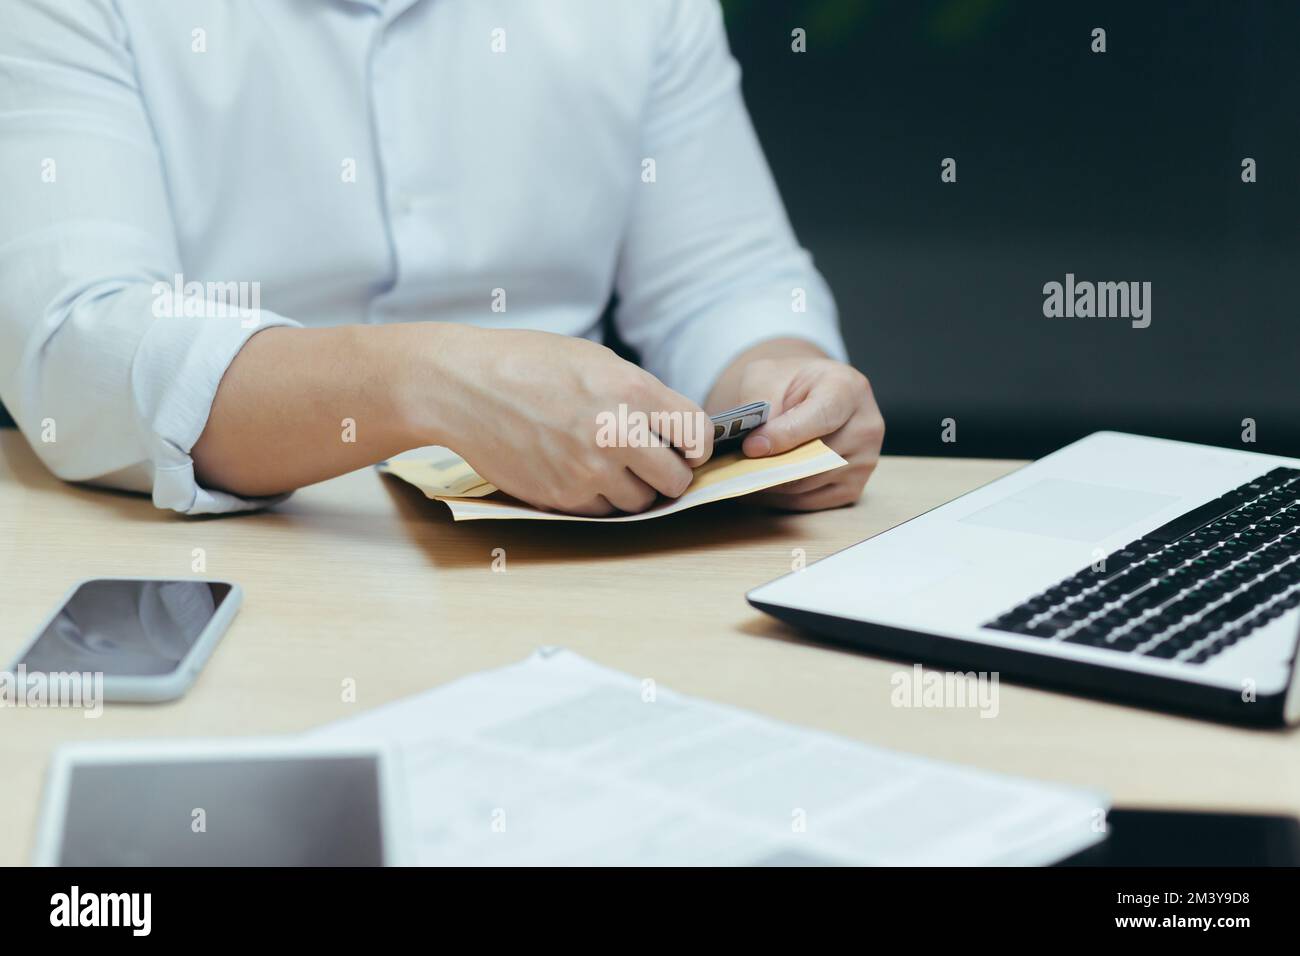 Close-up photo. A man's hands at a table with a laptop and documents take out cash from an envelope, count money. Stock Photo